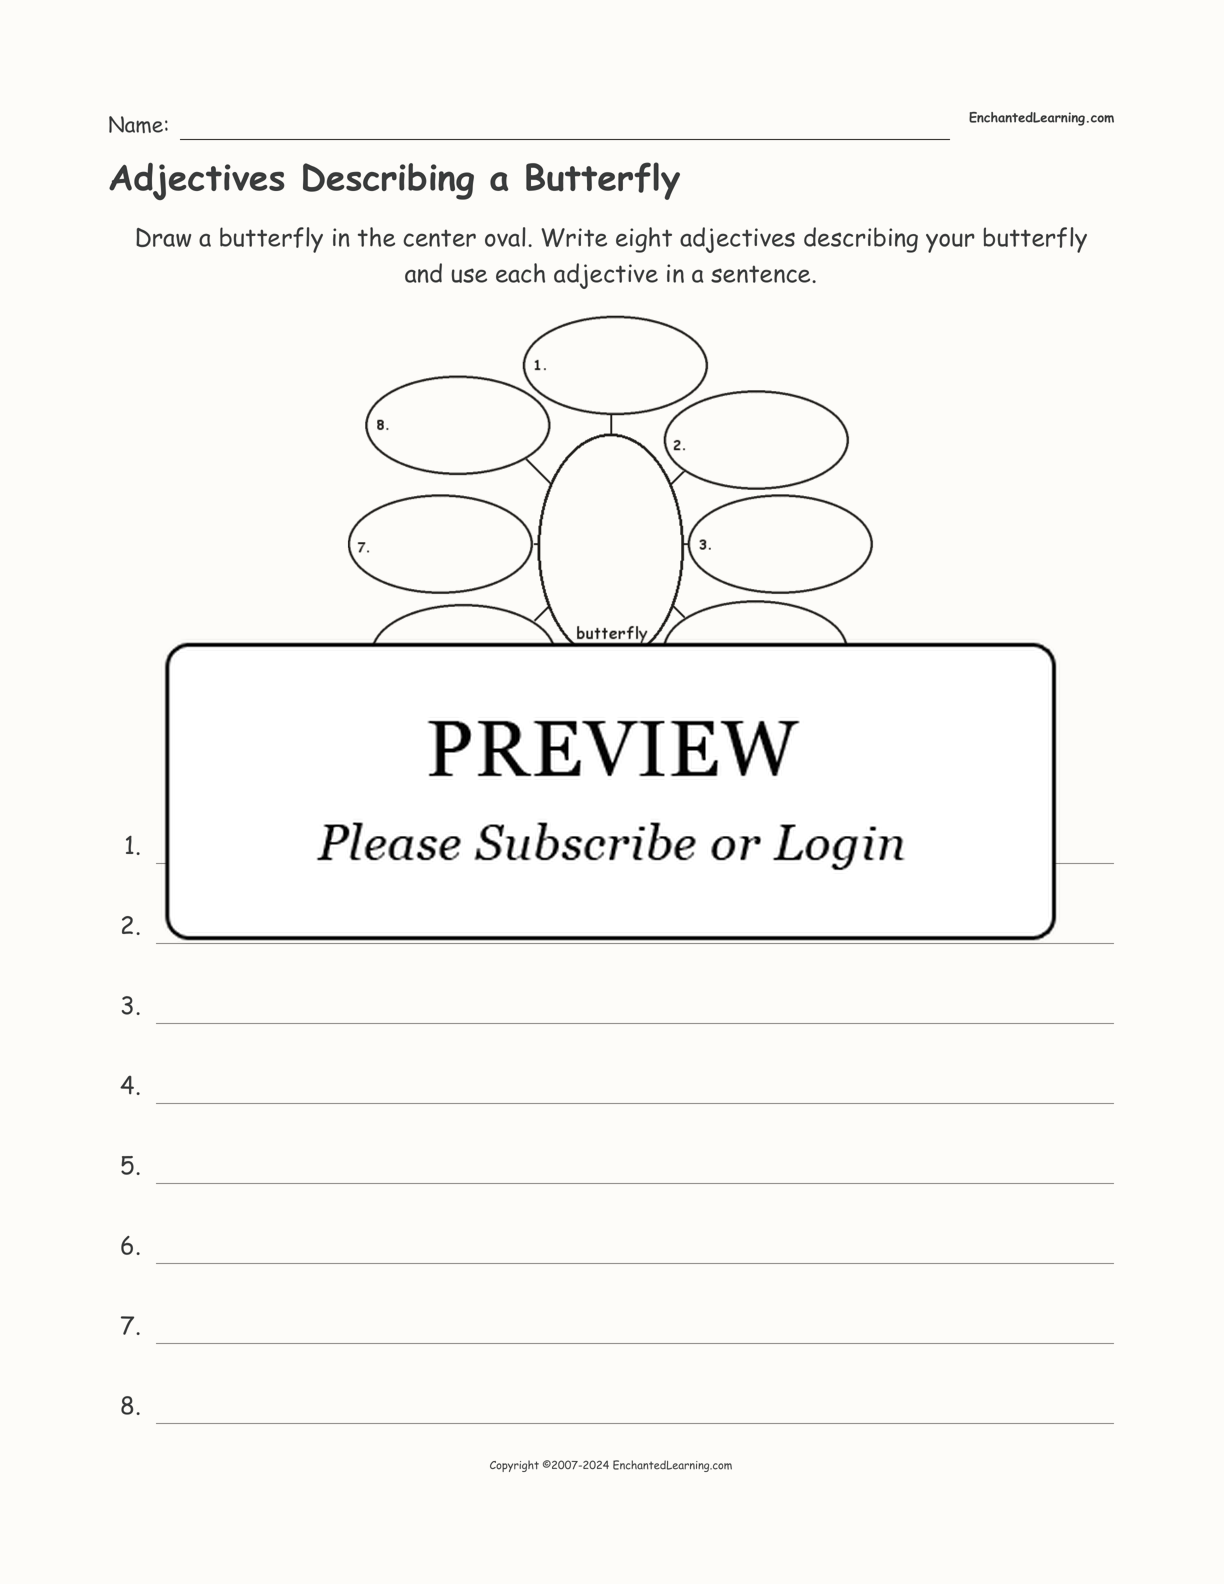 Adjectives Describing a Butterfly interactive worksheet page 1